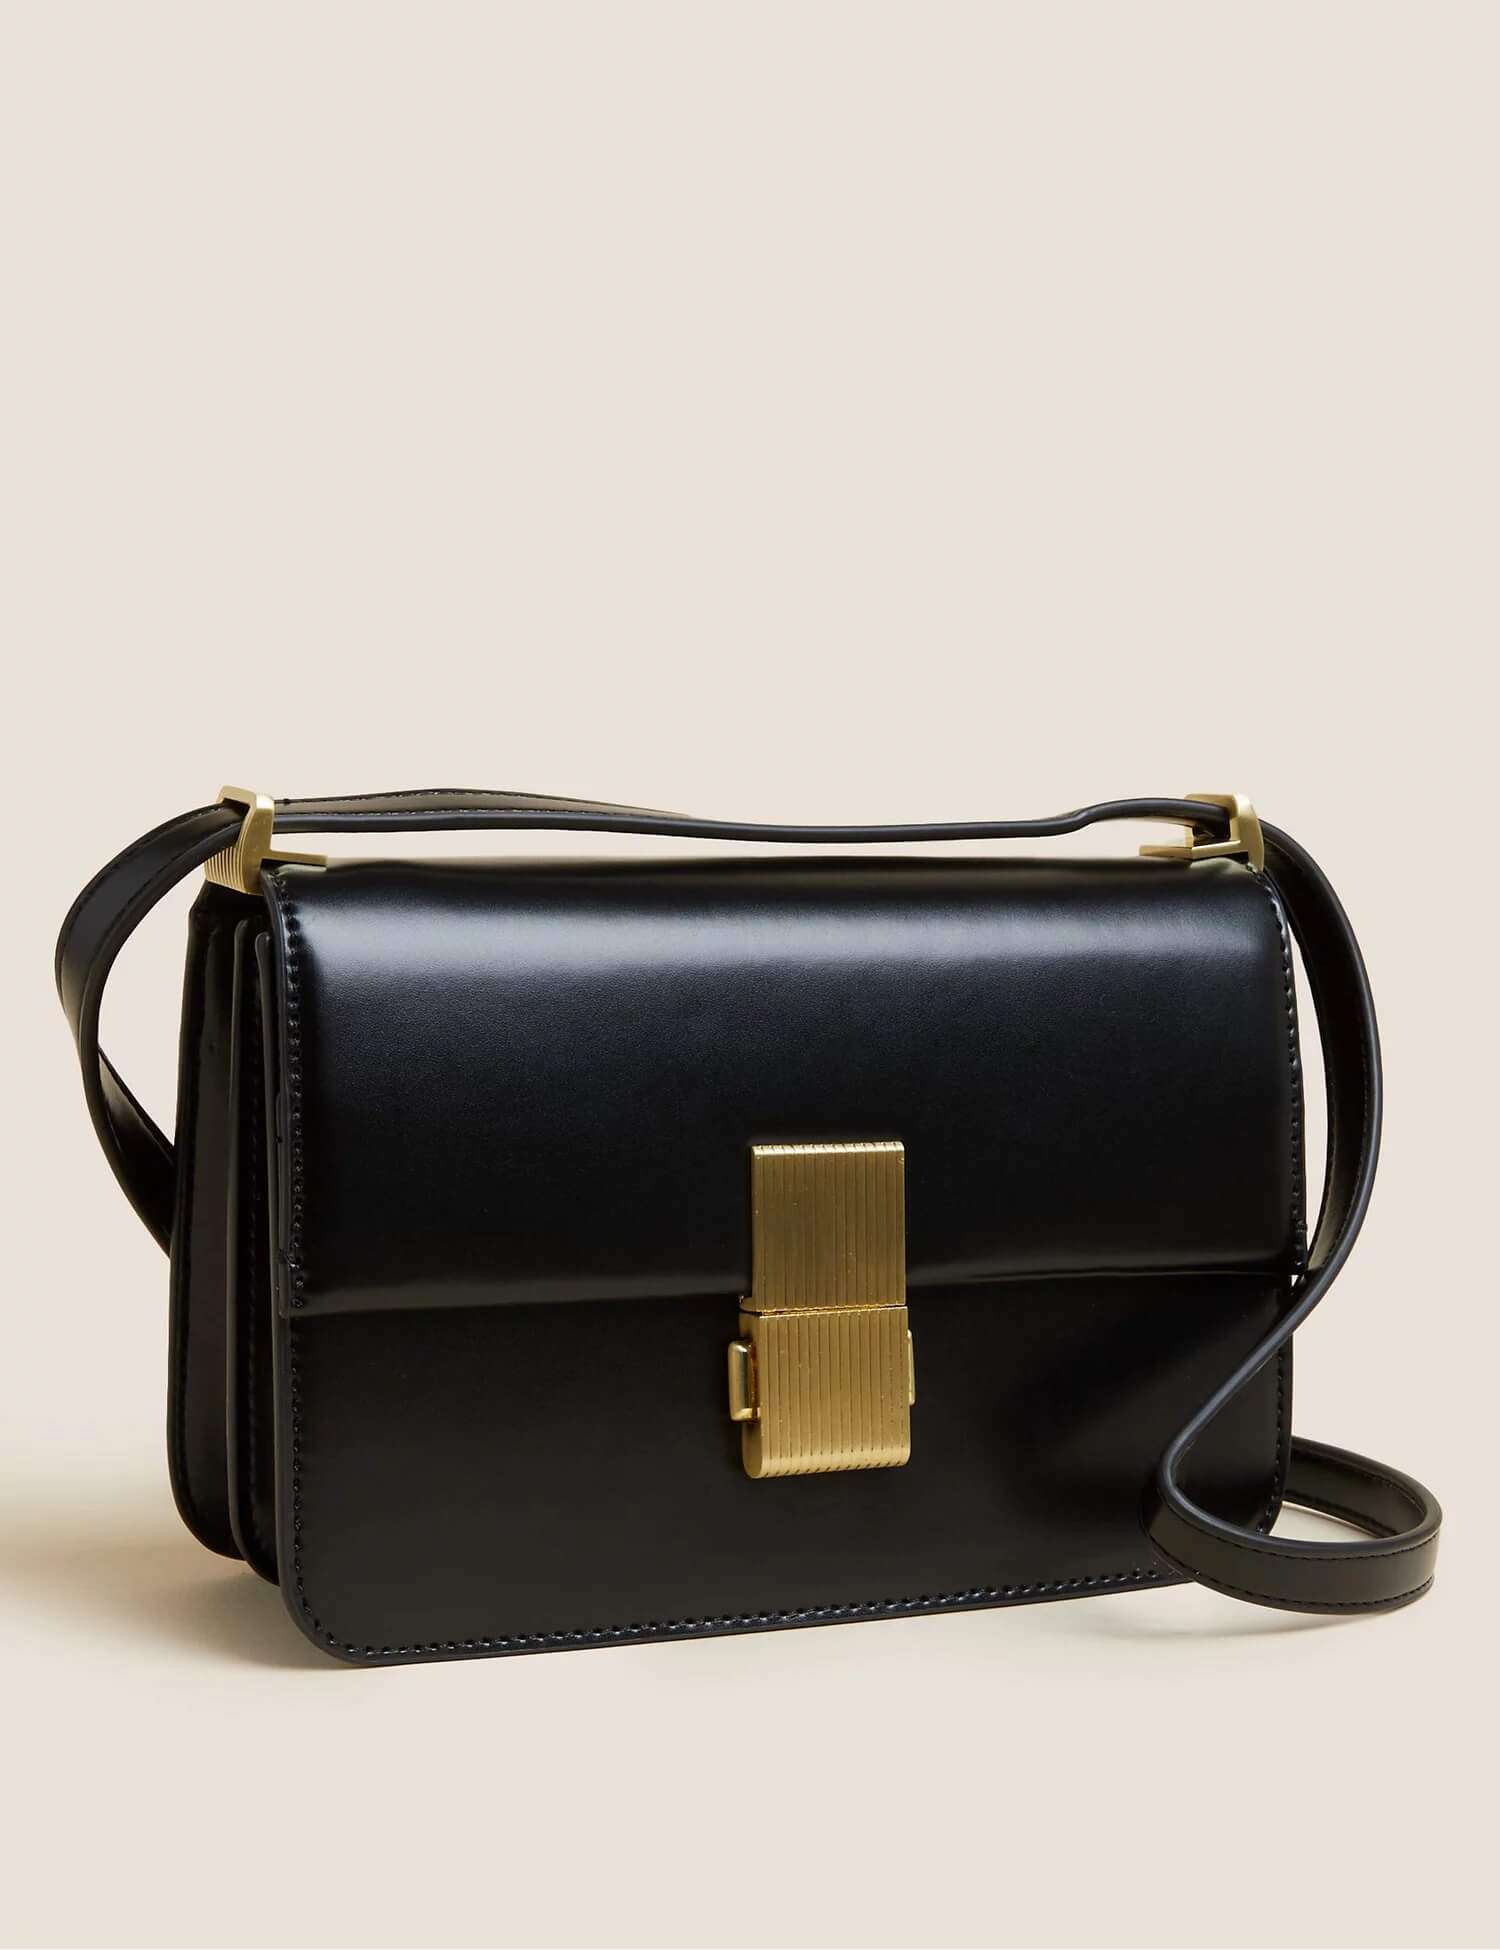 Marks and Spencer Faux Leather Cross Body Bag,